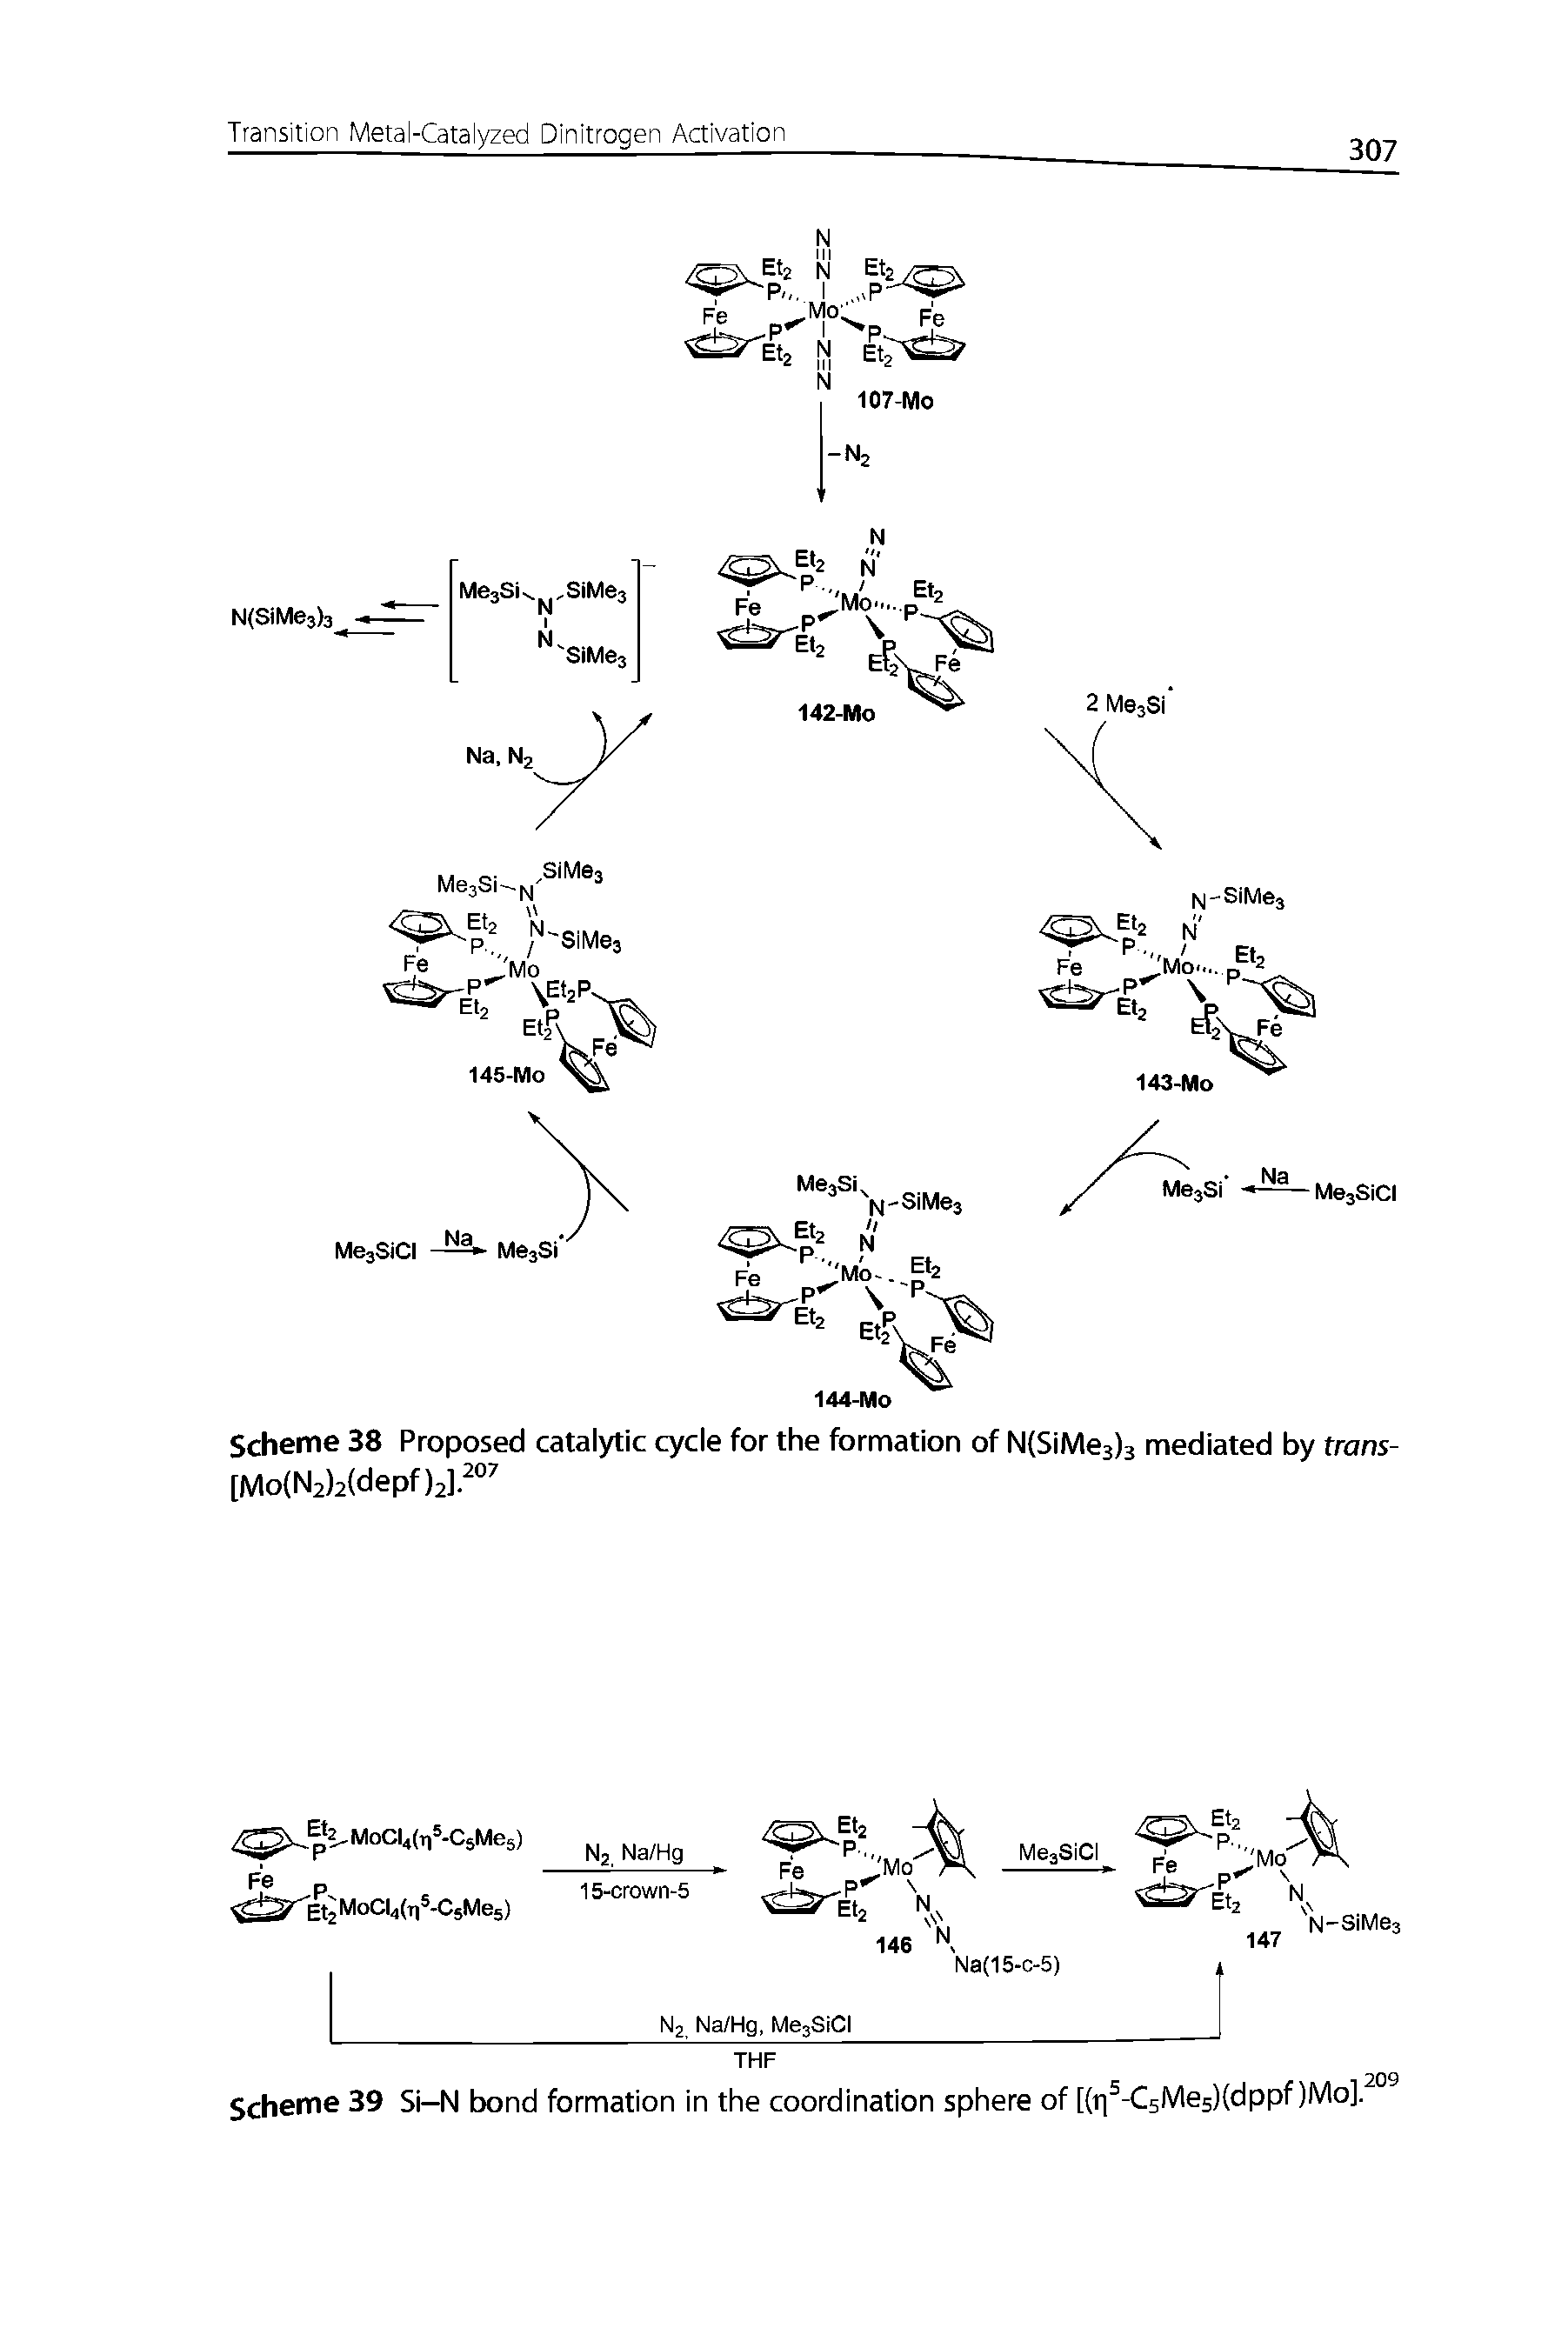 Scheme 39 Si-N bond formation in the coordination sphere of [(q -CsMesjldppf )Mo].